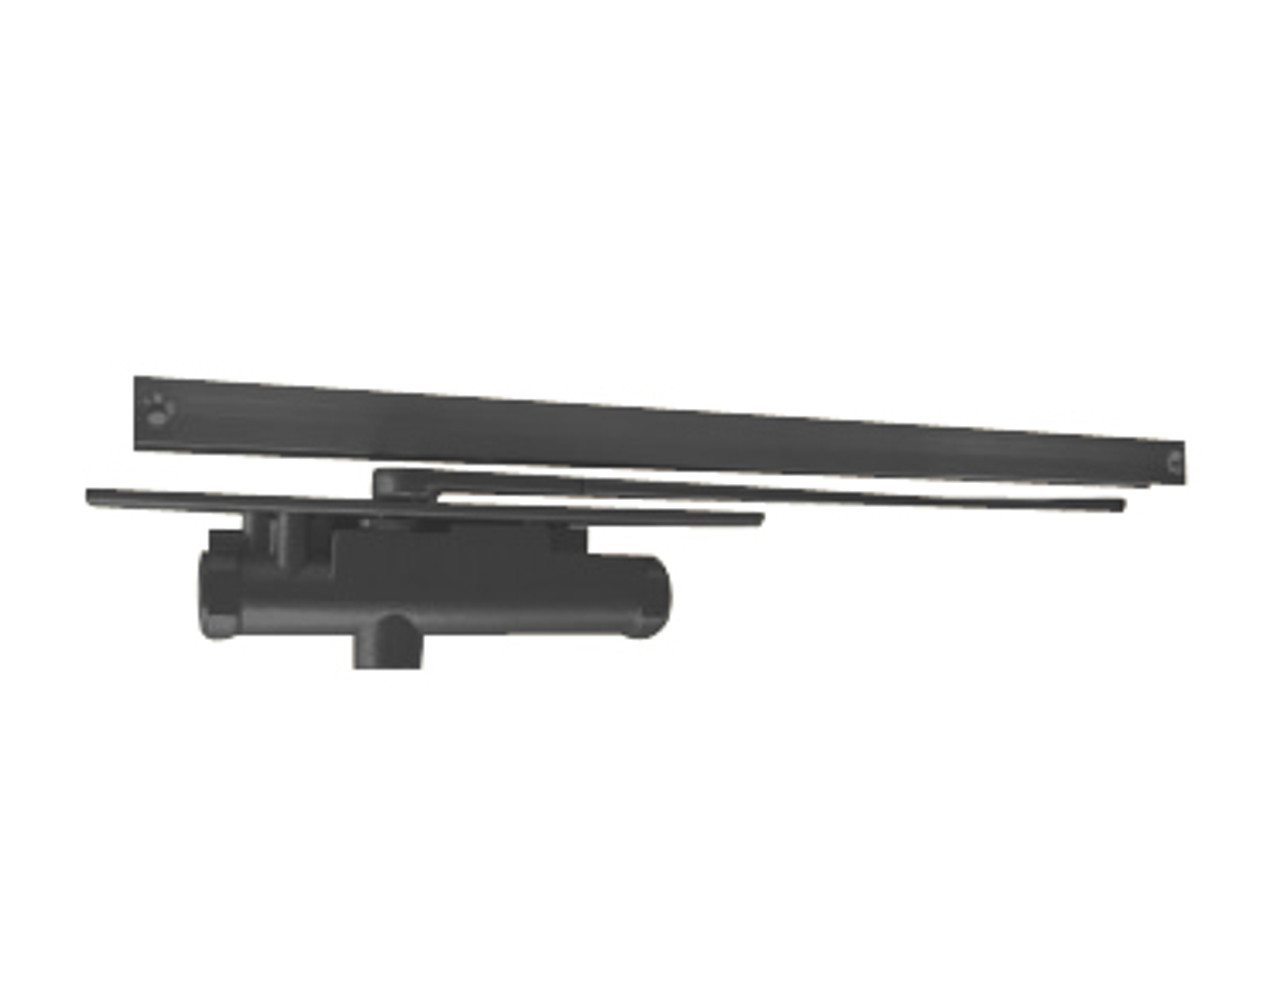 3033-H-RH-BLACK LCN Door Closer with Hold Open Arm in Black Finish